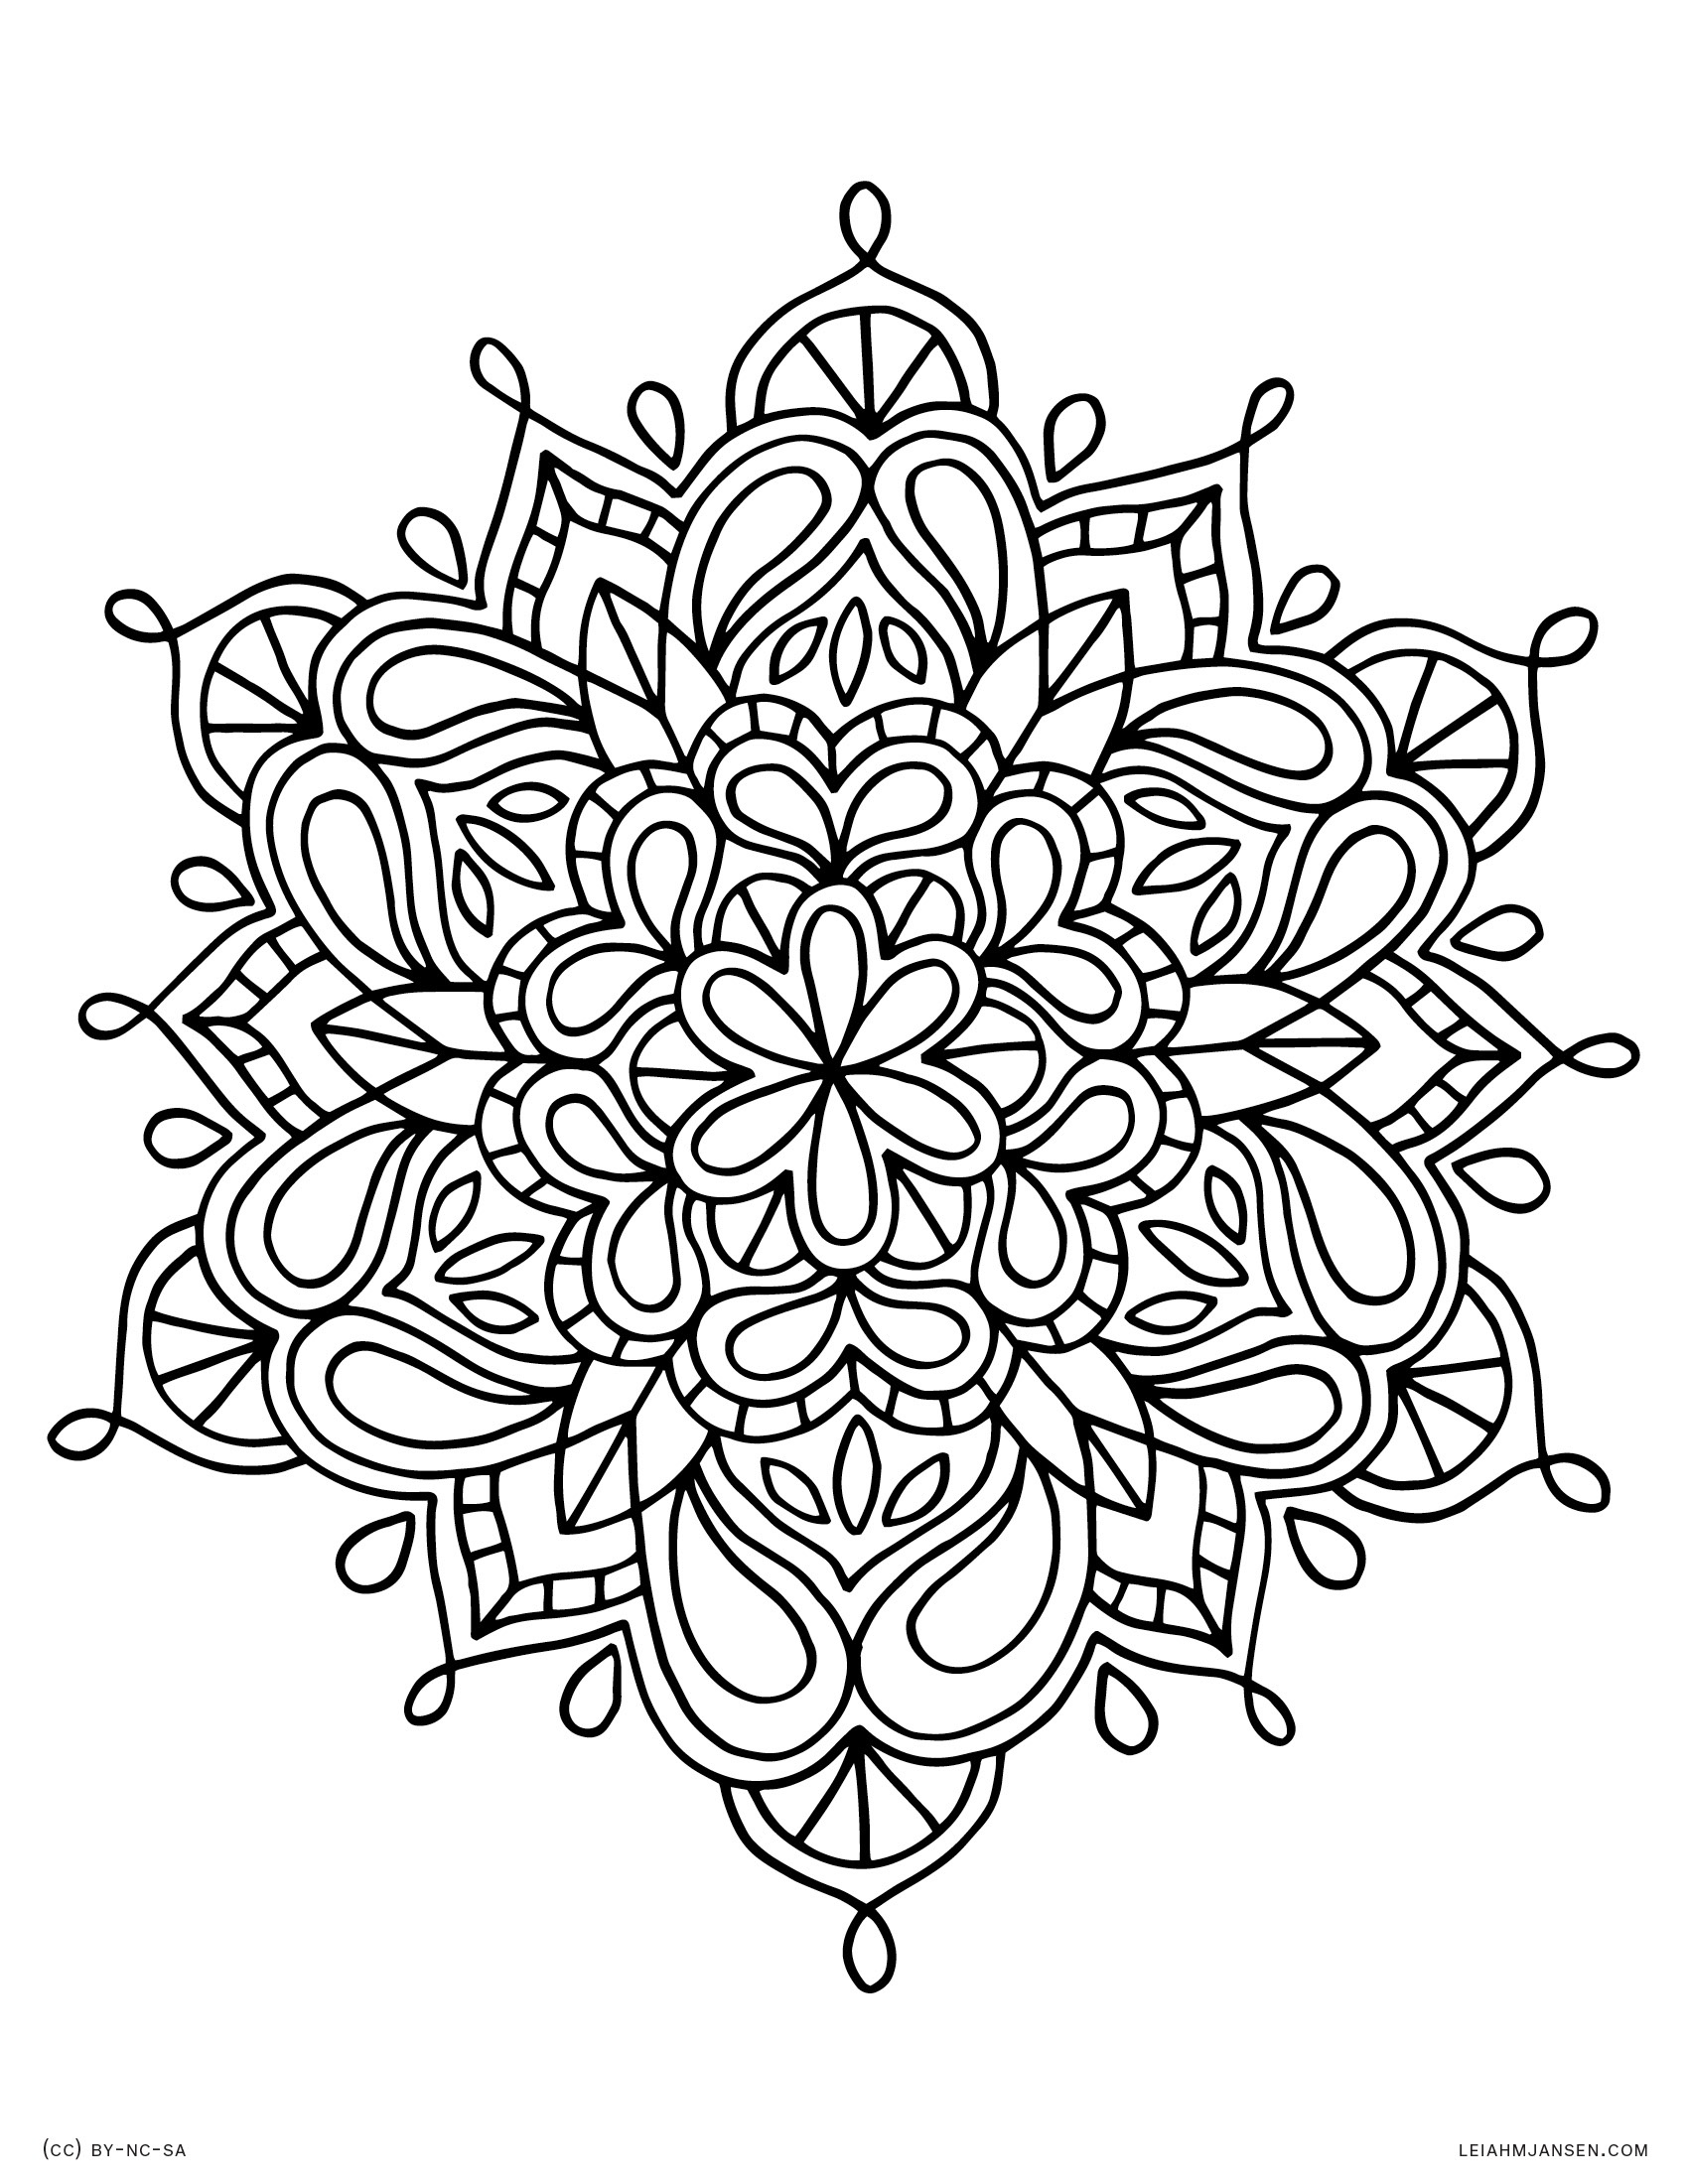 Coloring Pages - Free Printable Mandala Coloring Pages For Adults